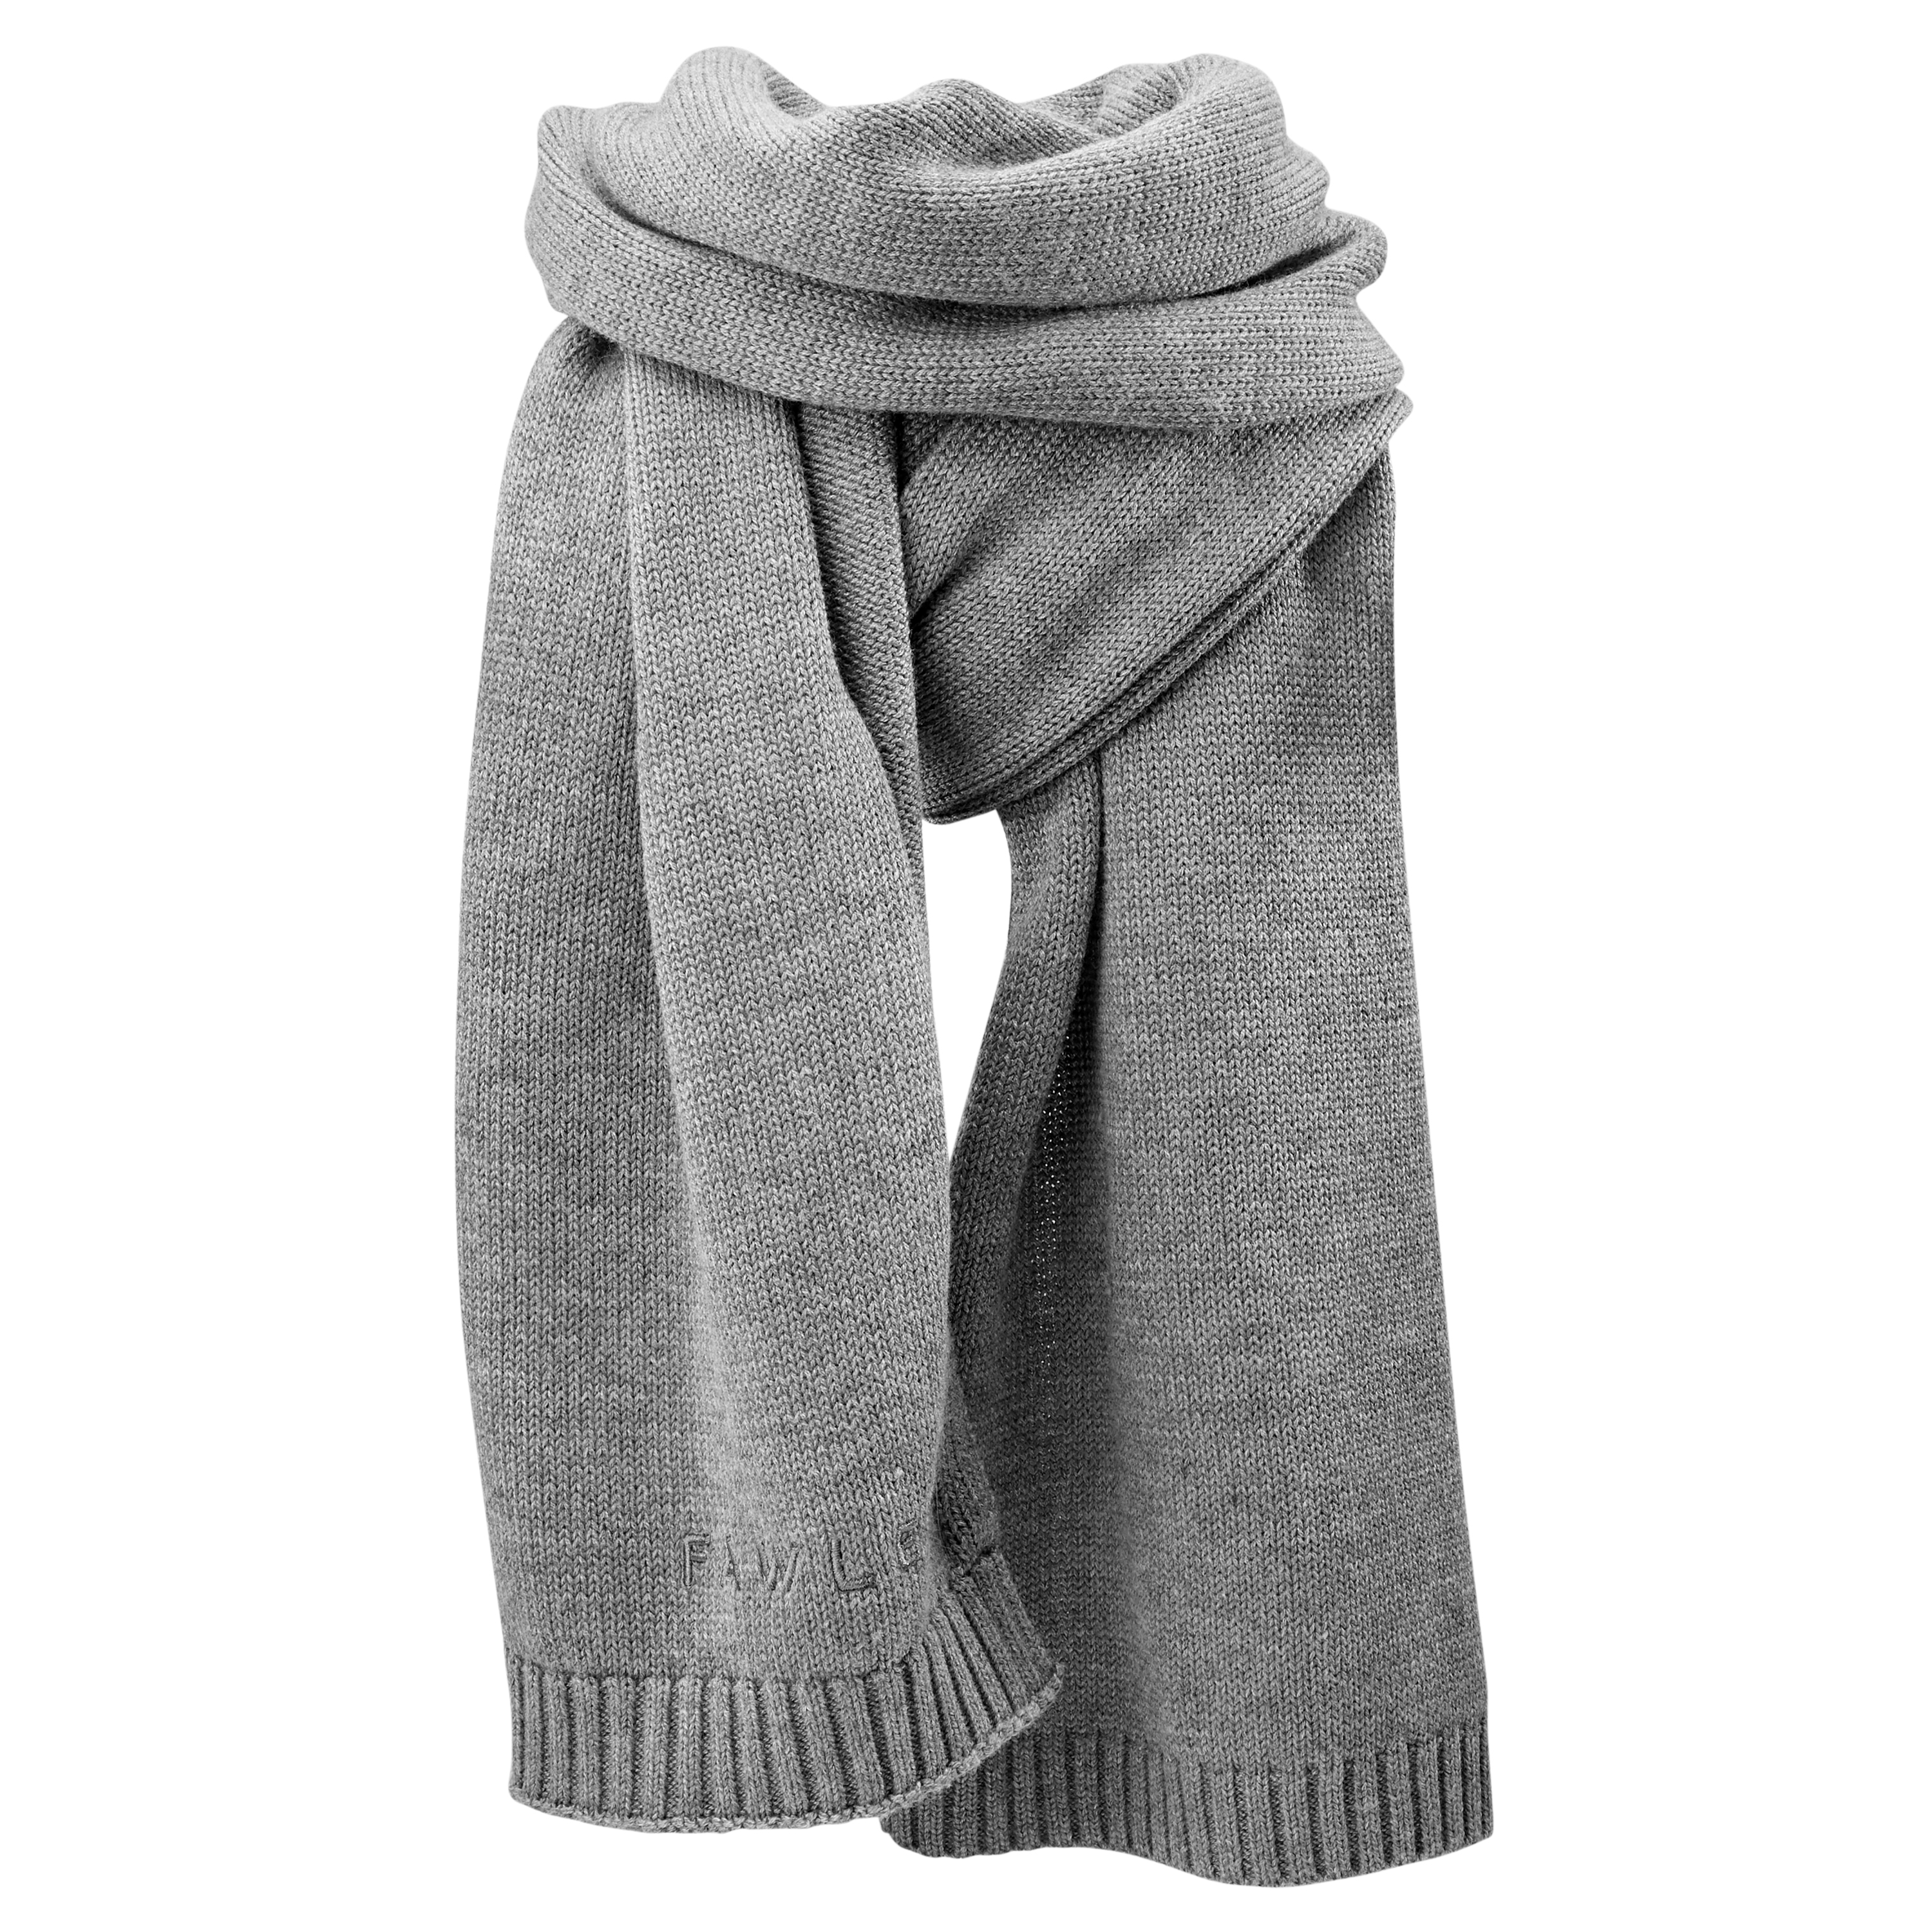 Accessories Scarves Tube Scarves Fifth Avenue Tube Scarf natural white-light grey cable stitch casual look 